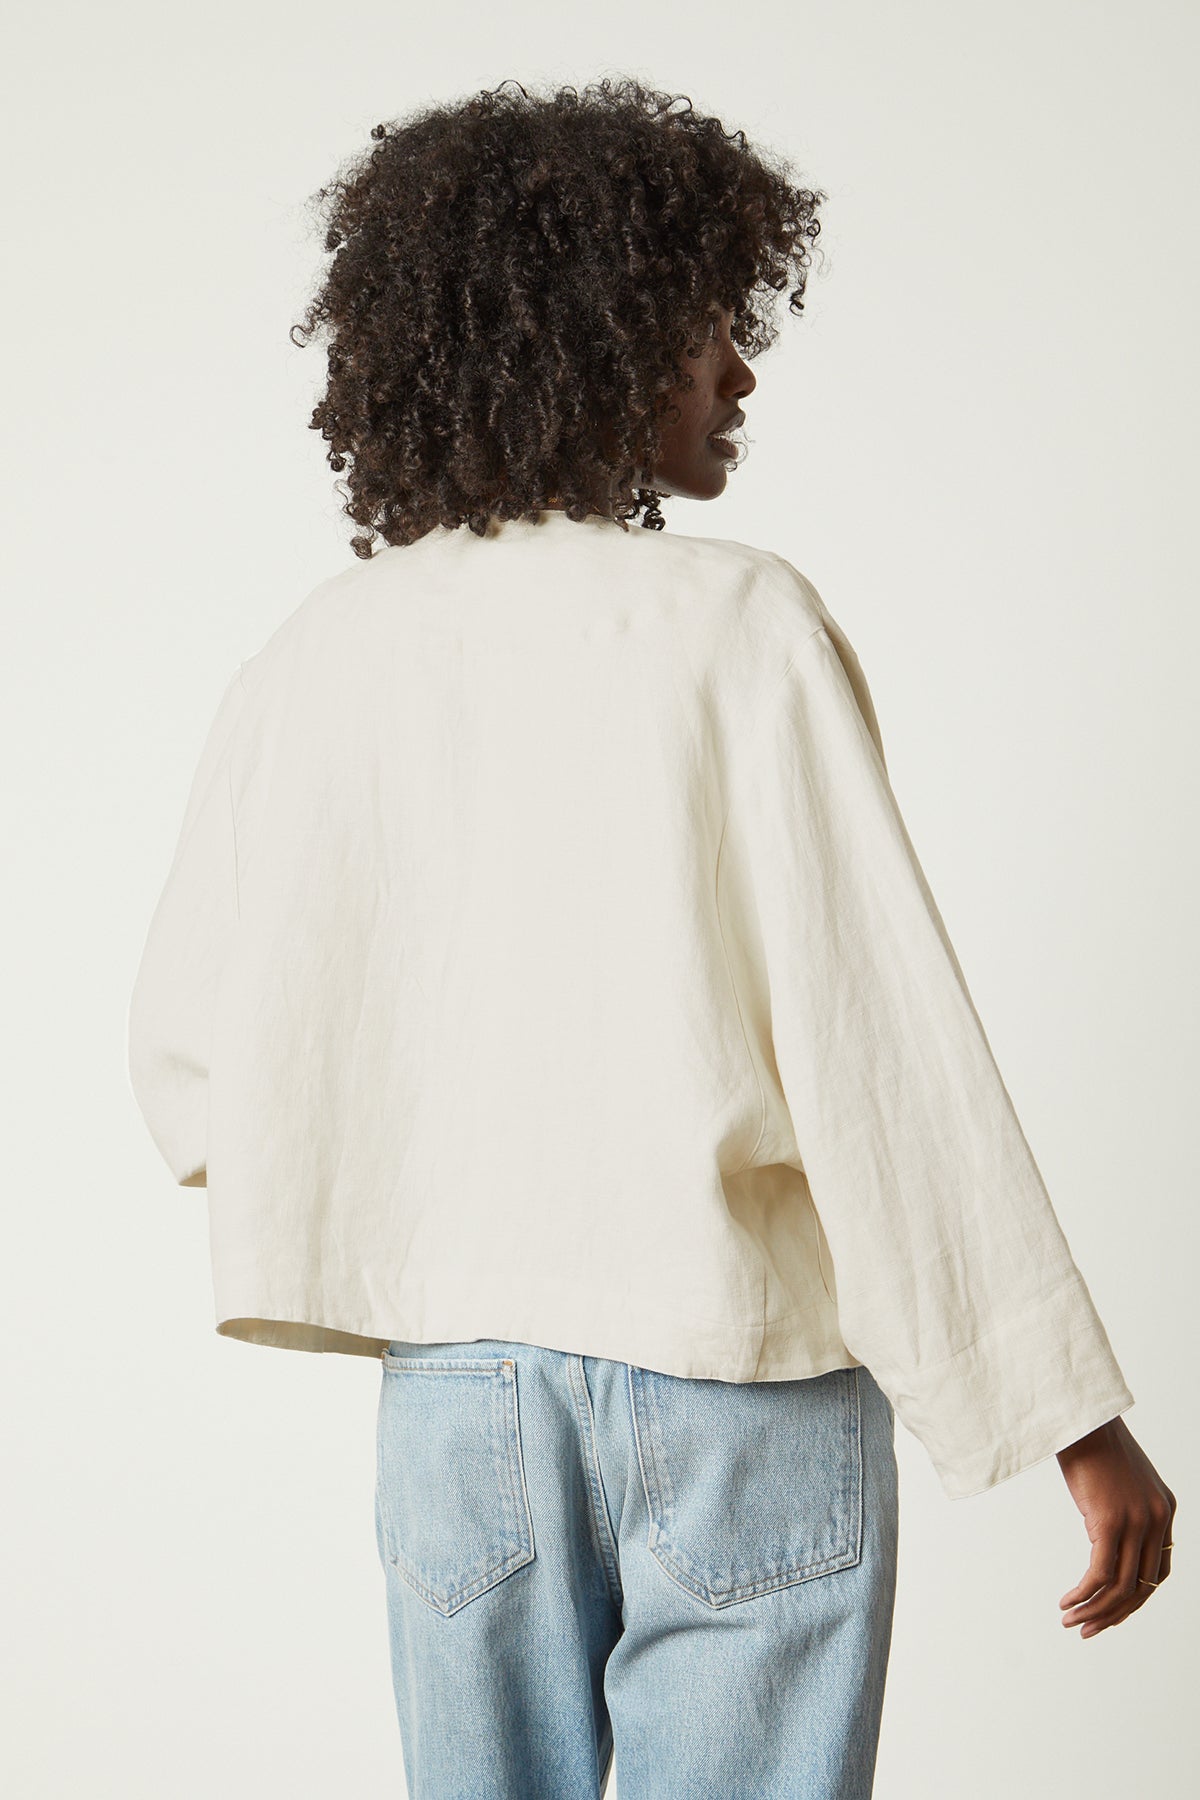 The back view of a woman wearing BRIELLE HEAVY LINEN JACKET by Velvet by Graham & Spencer jeans and a white jacket.-26215483113665